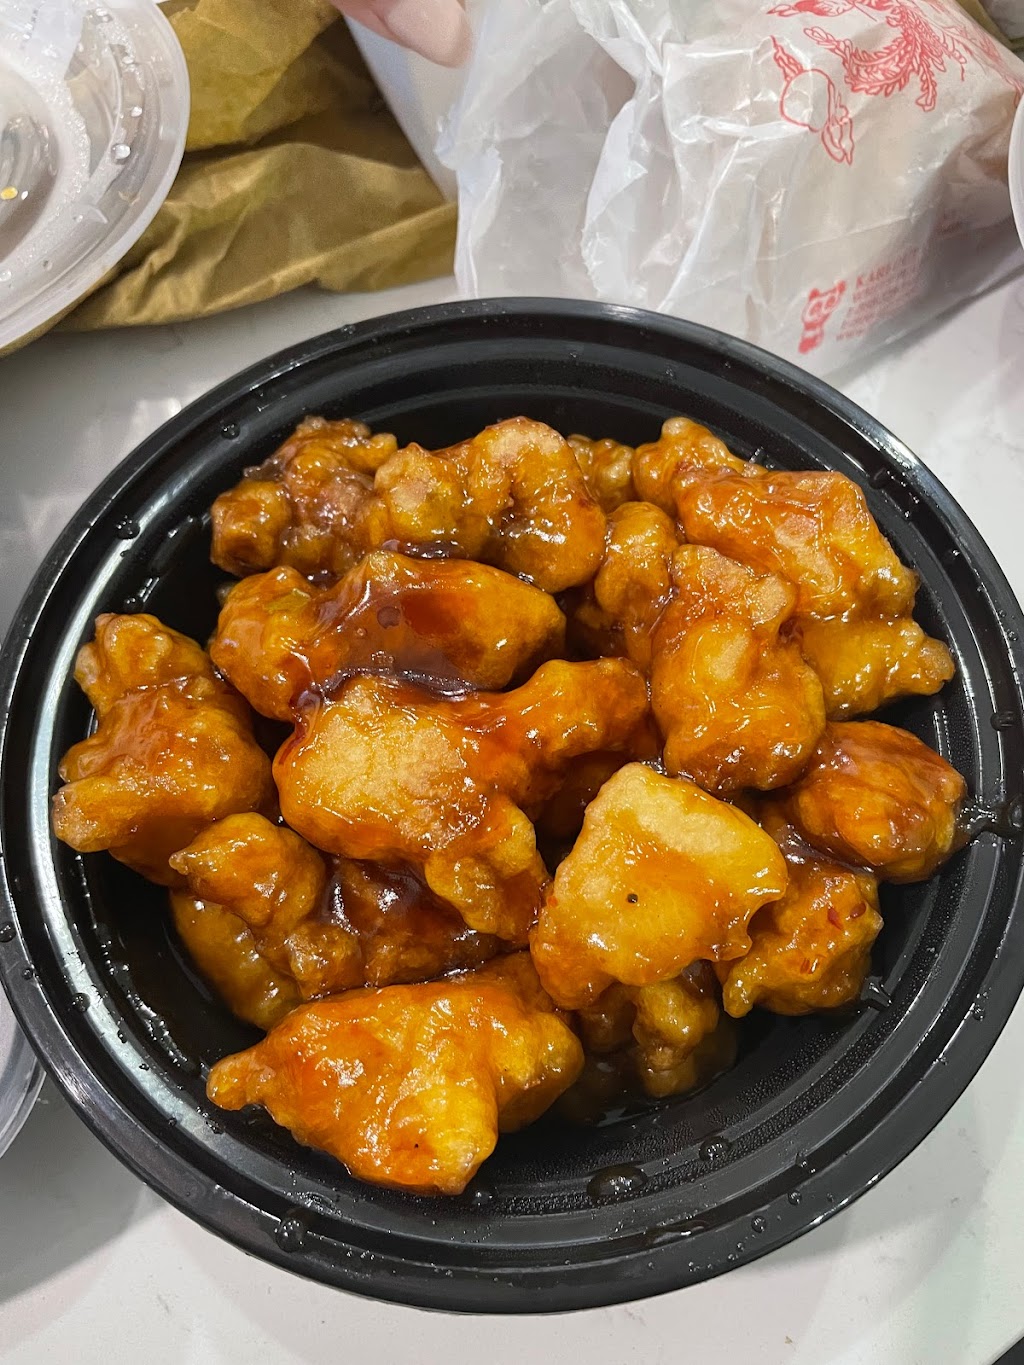 Moon Star Chinese Kitchen | 483 Federal Rd, Brookfield, CT 06804 | Phone: (203) 740-8558